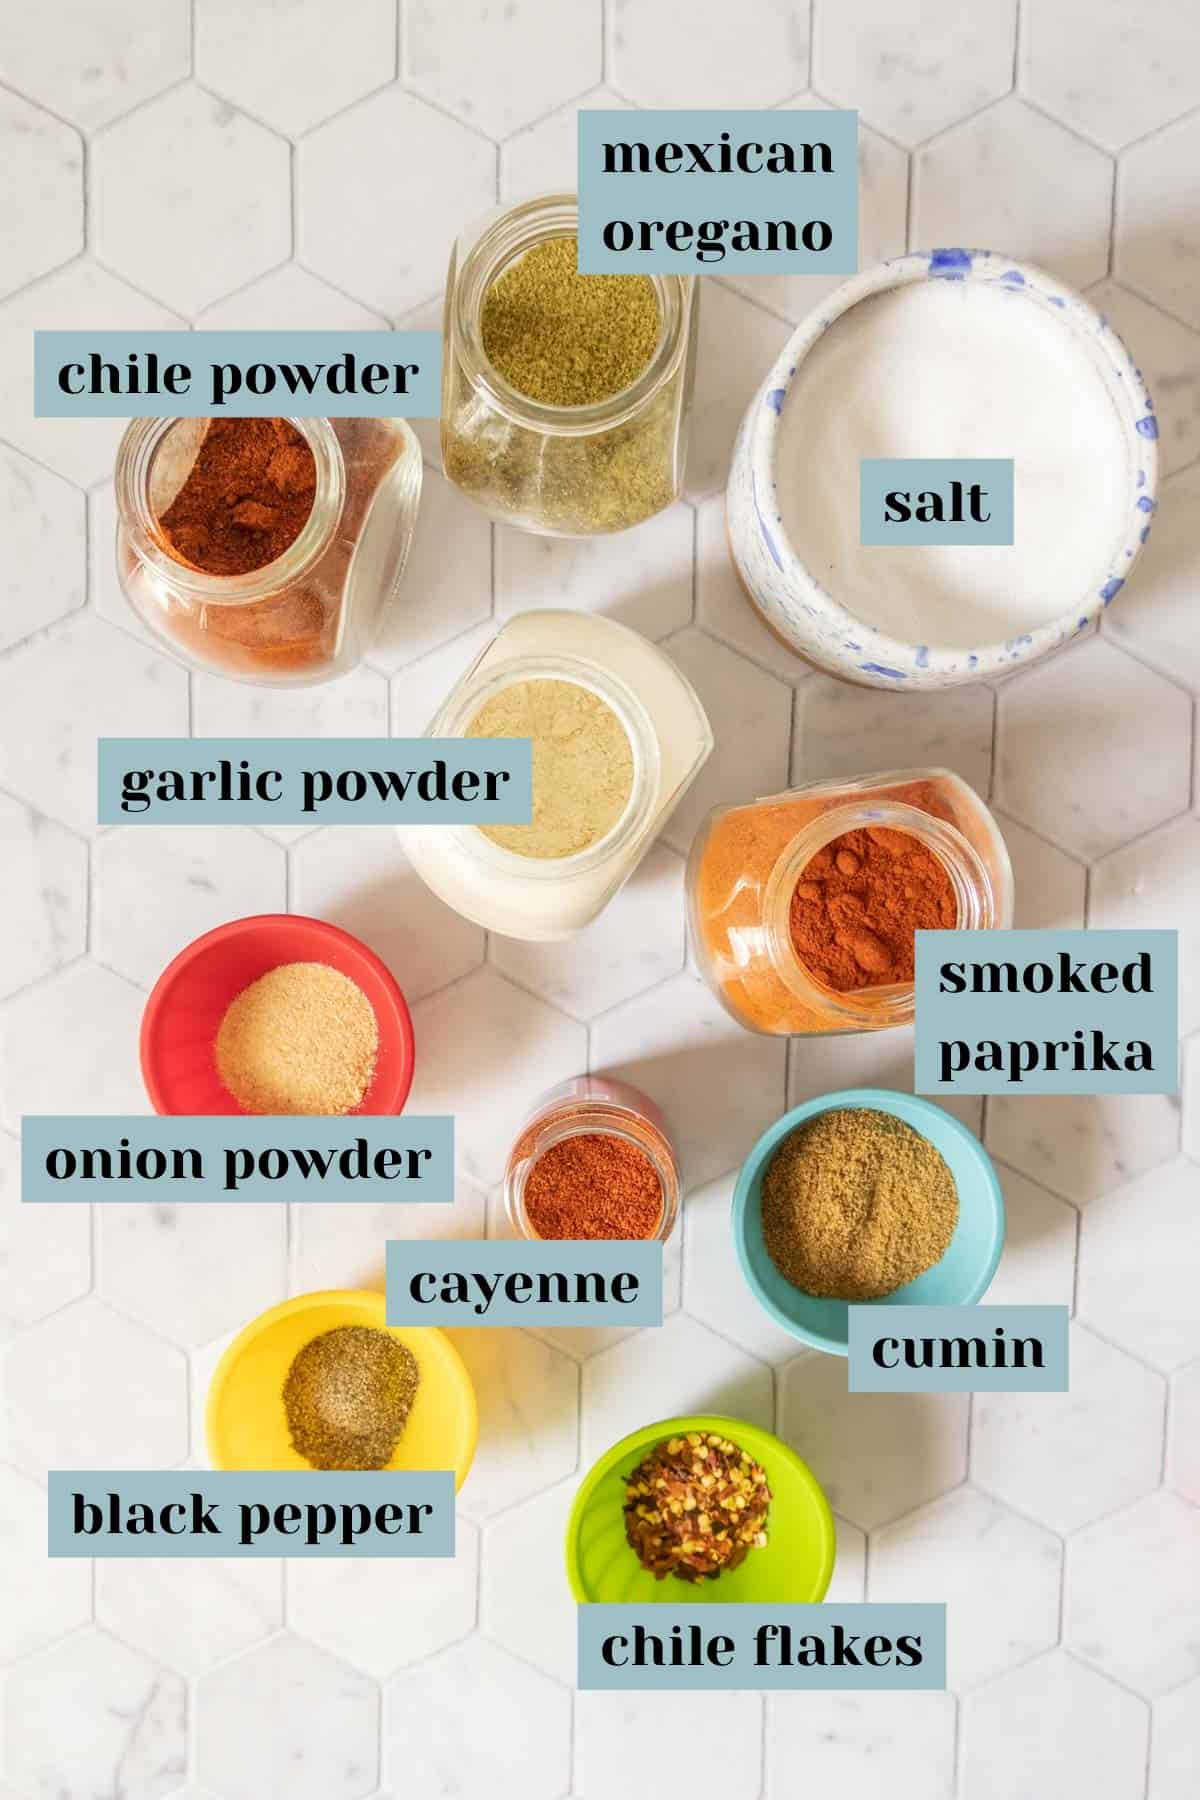 Ingredients for homemade taco seasoning on a tile surface with labels.